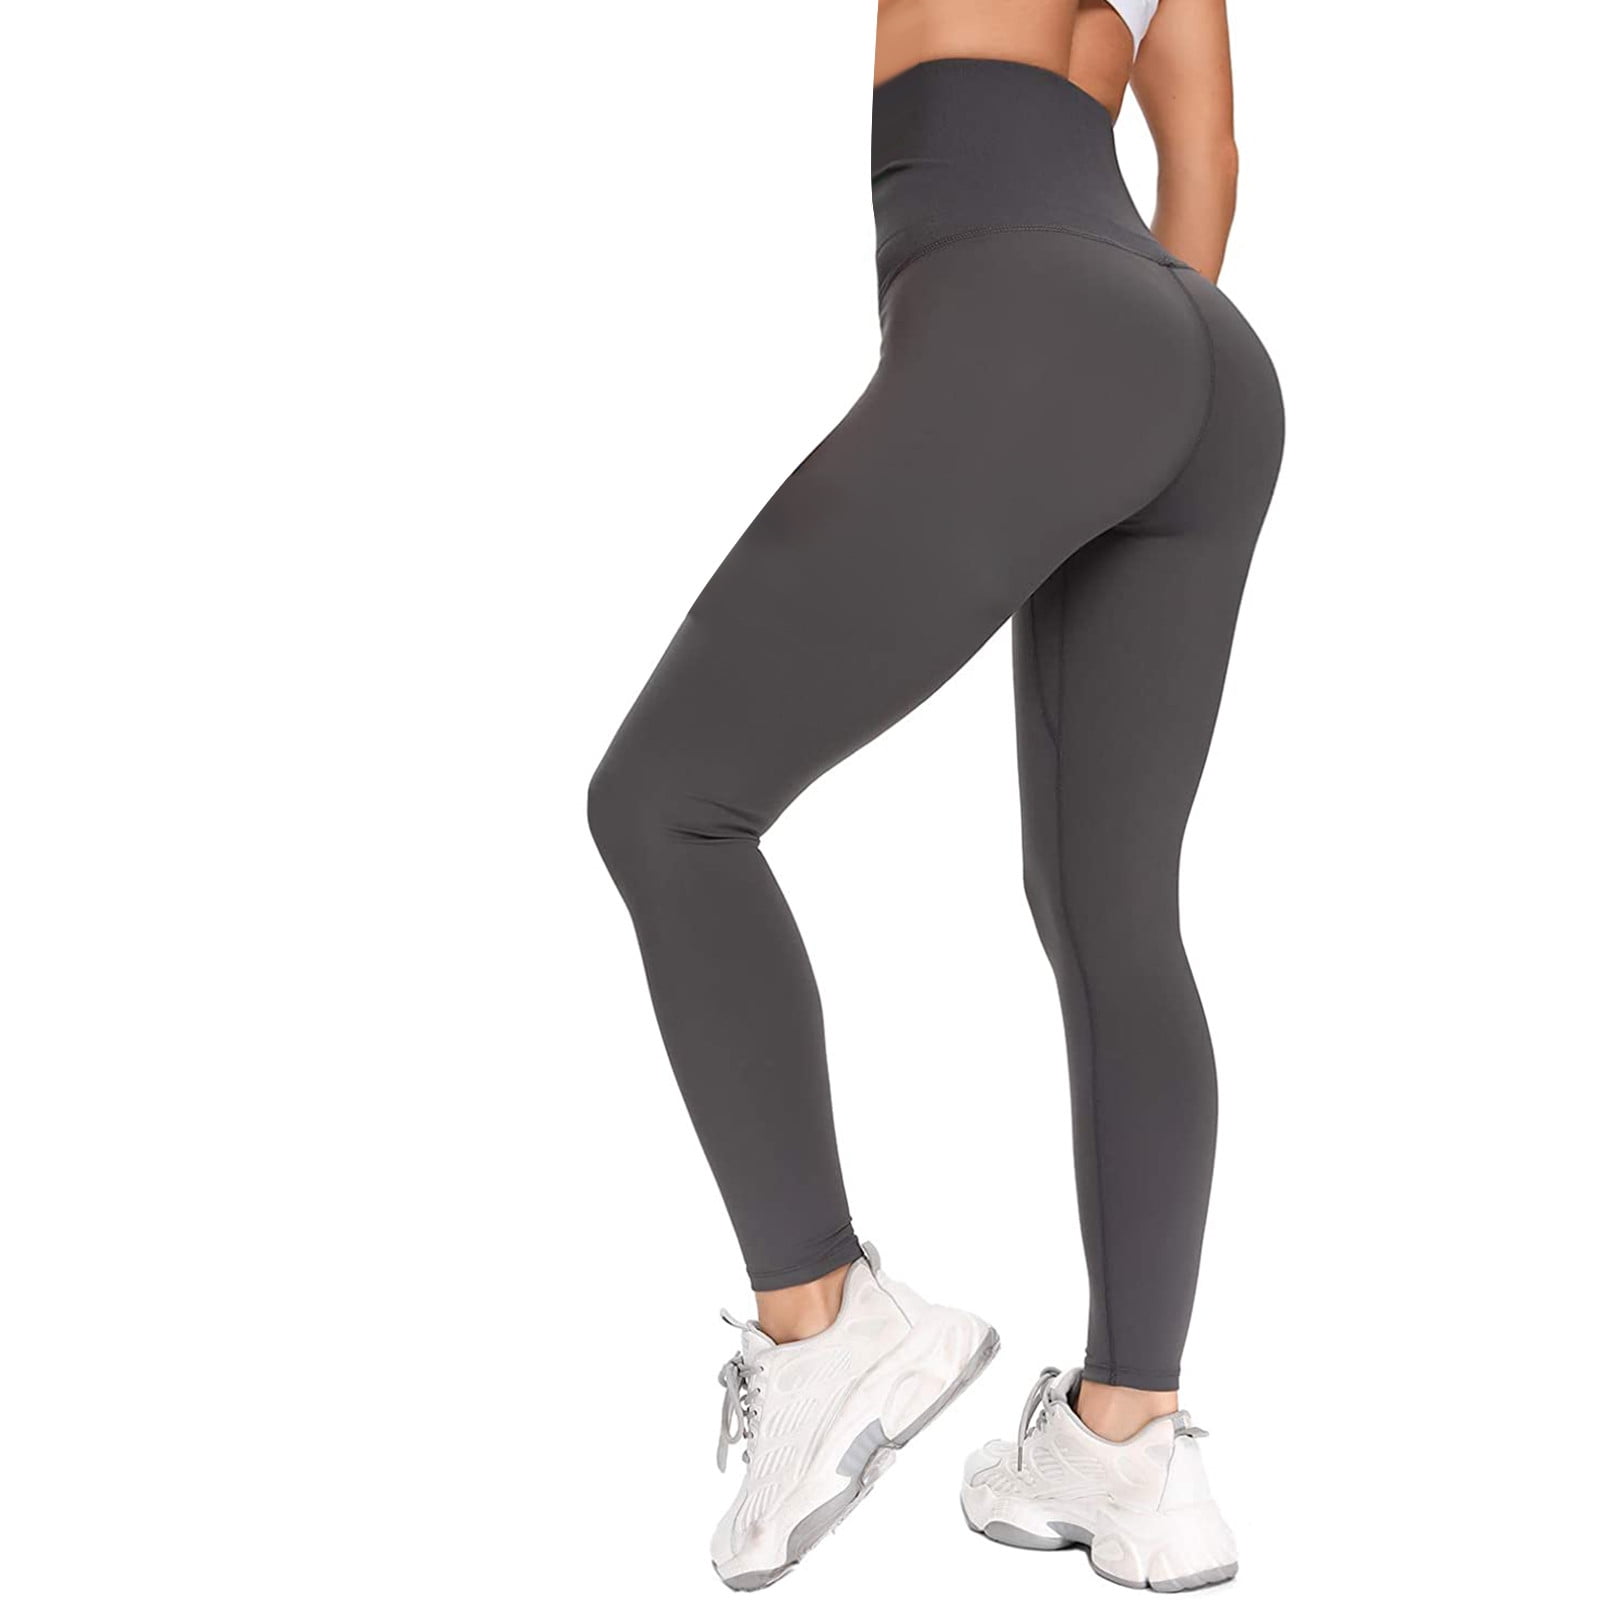 Blisset 3 Pack High Waisted Leggings for Women-Soft Athletic Tummy Control  Pants for Running Yoga Workout Reg & Plus Size